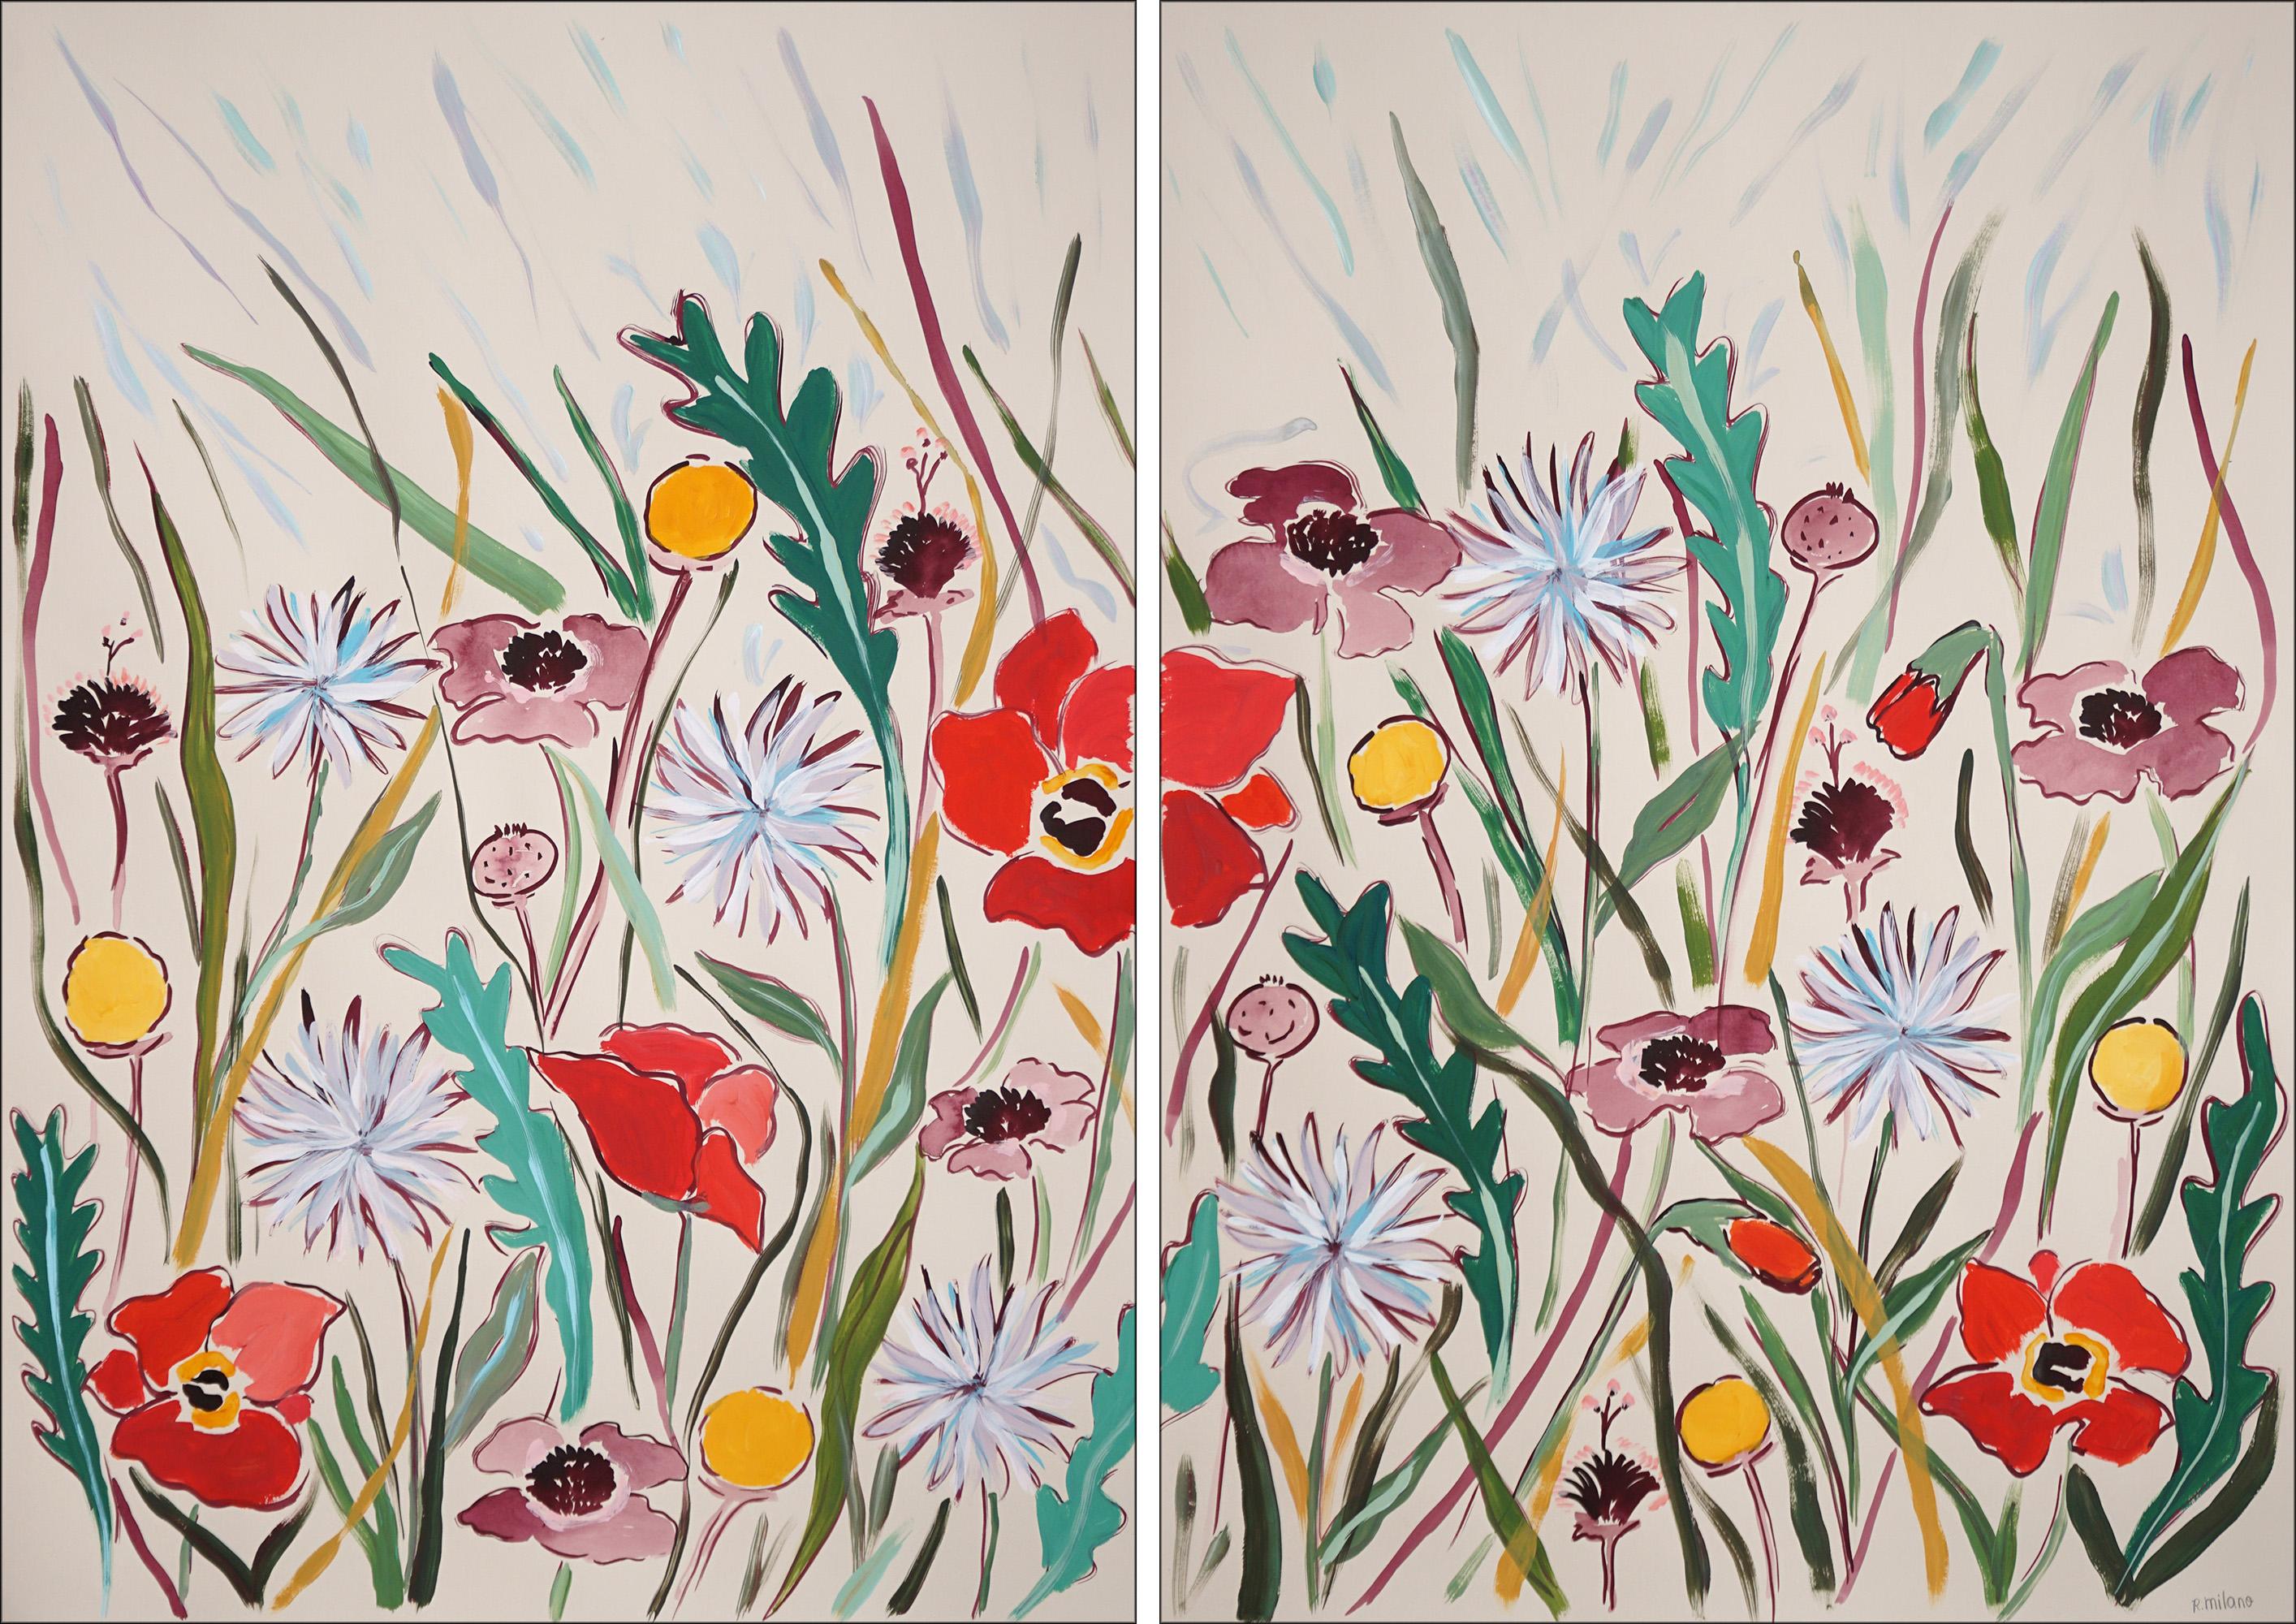 Pastel Wildflowers II, Illustration Style Diptych, Red Poppies and Dandelions 